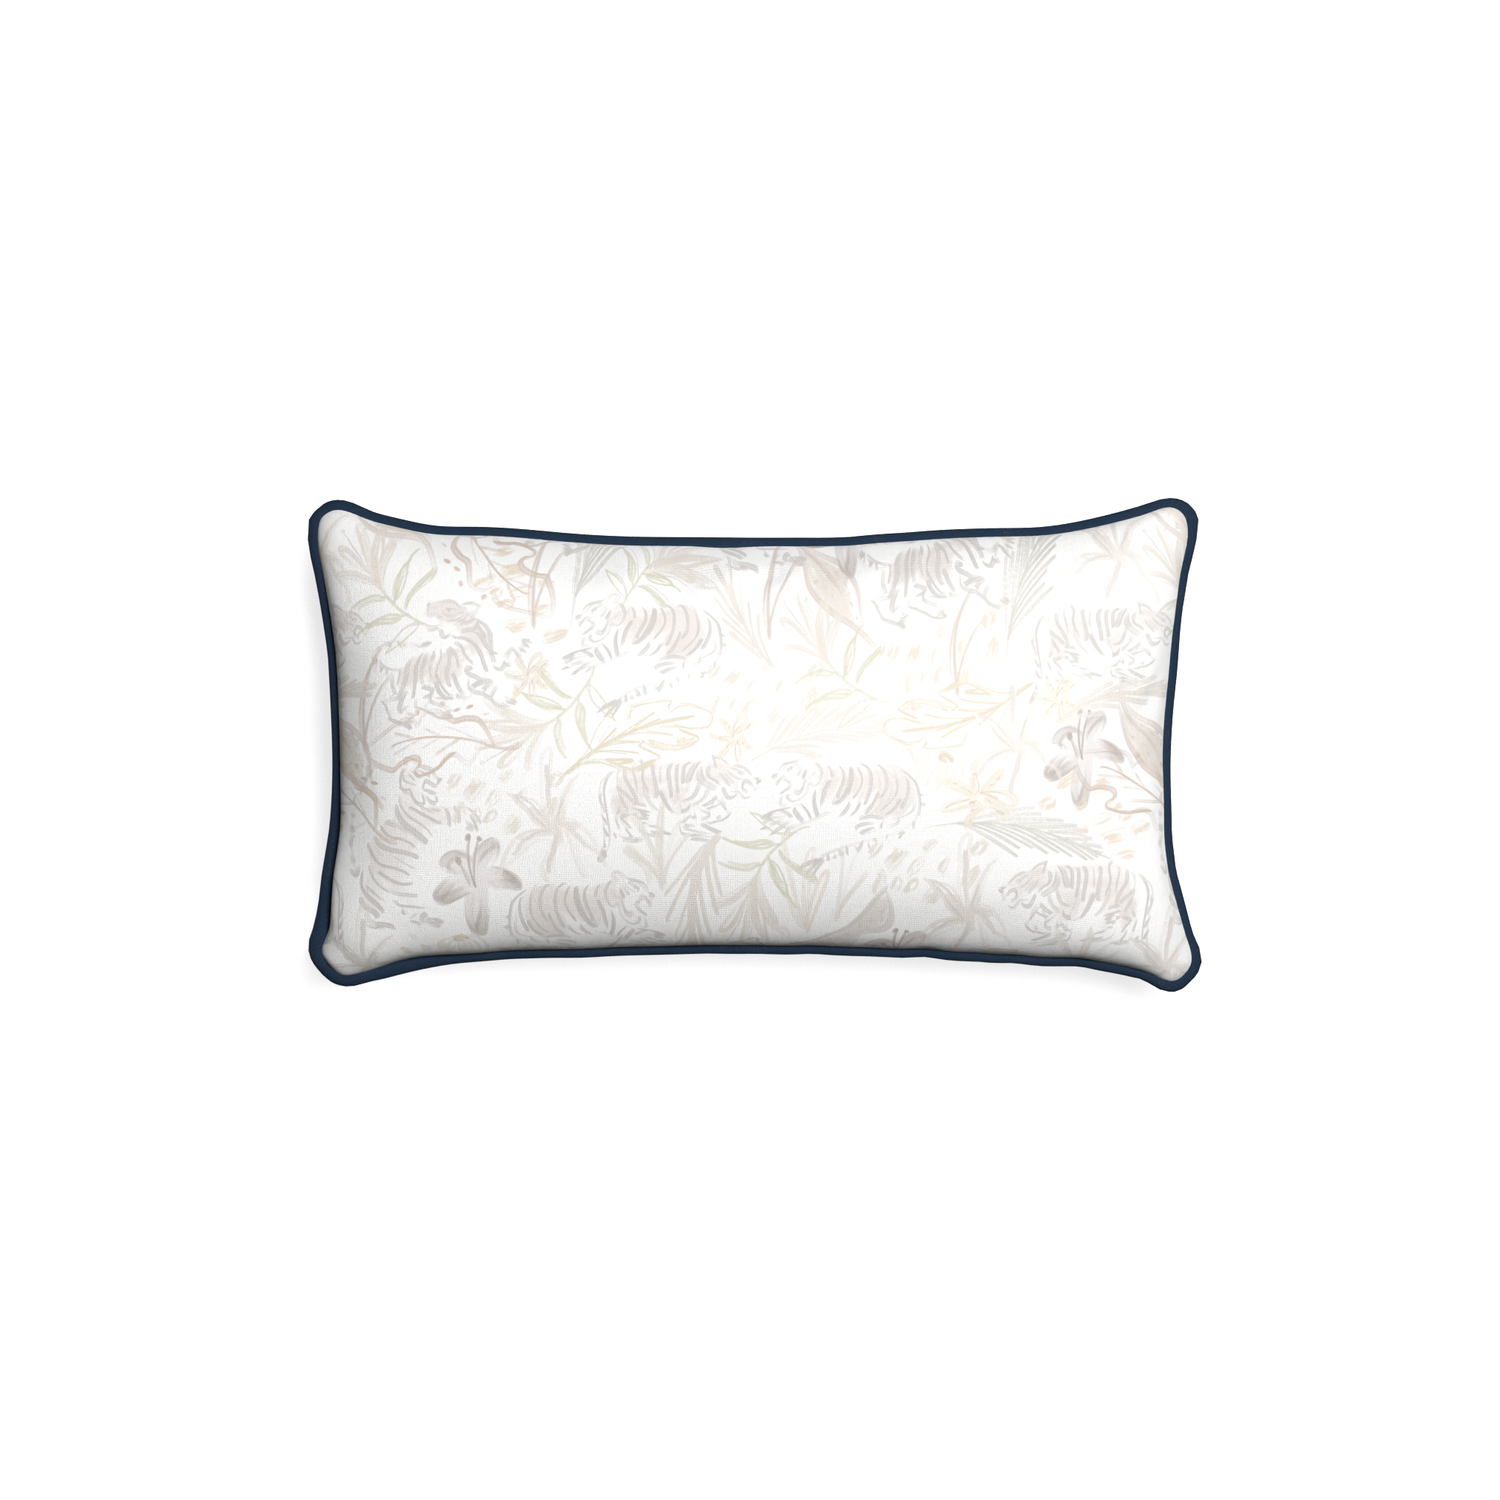 Petite-lumbar frida sand custom beige chinoiserie tigerpillow with c piping on white background